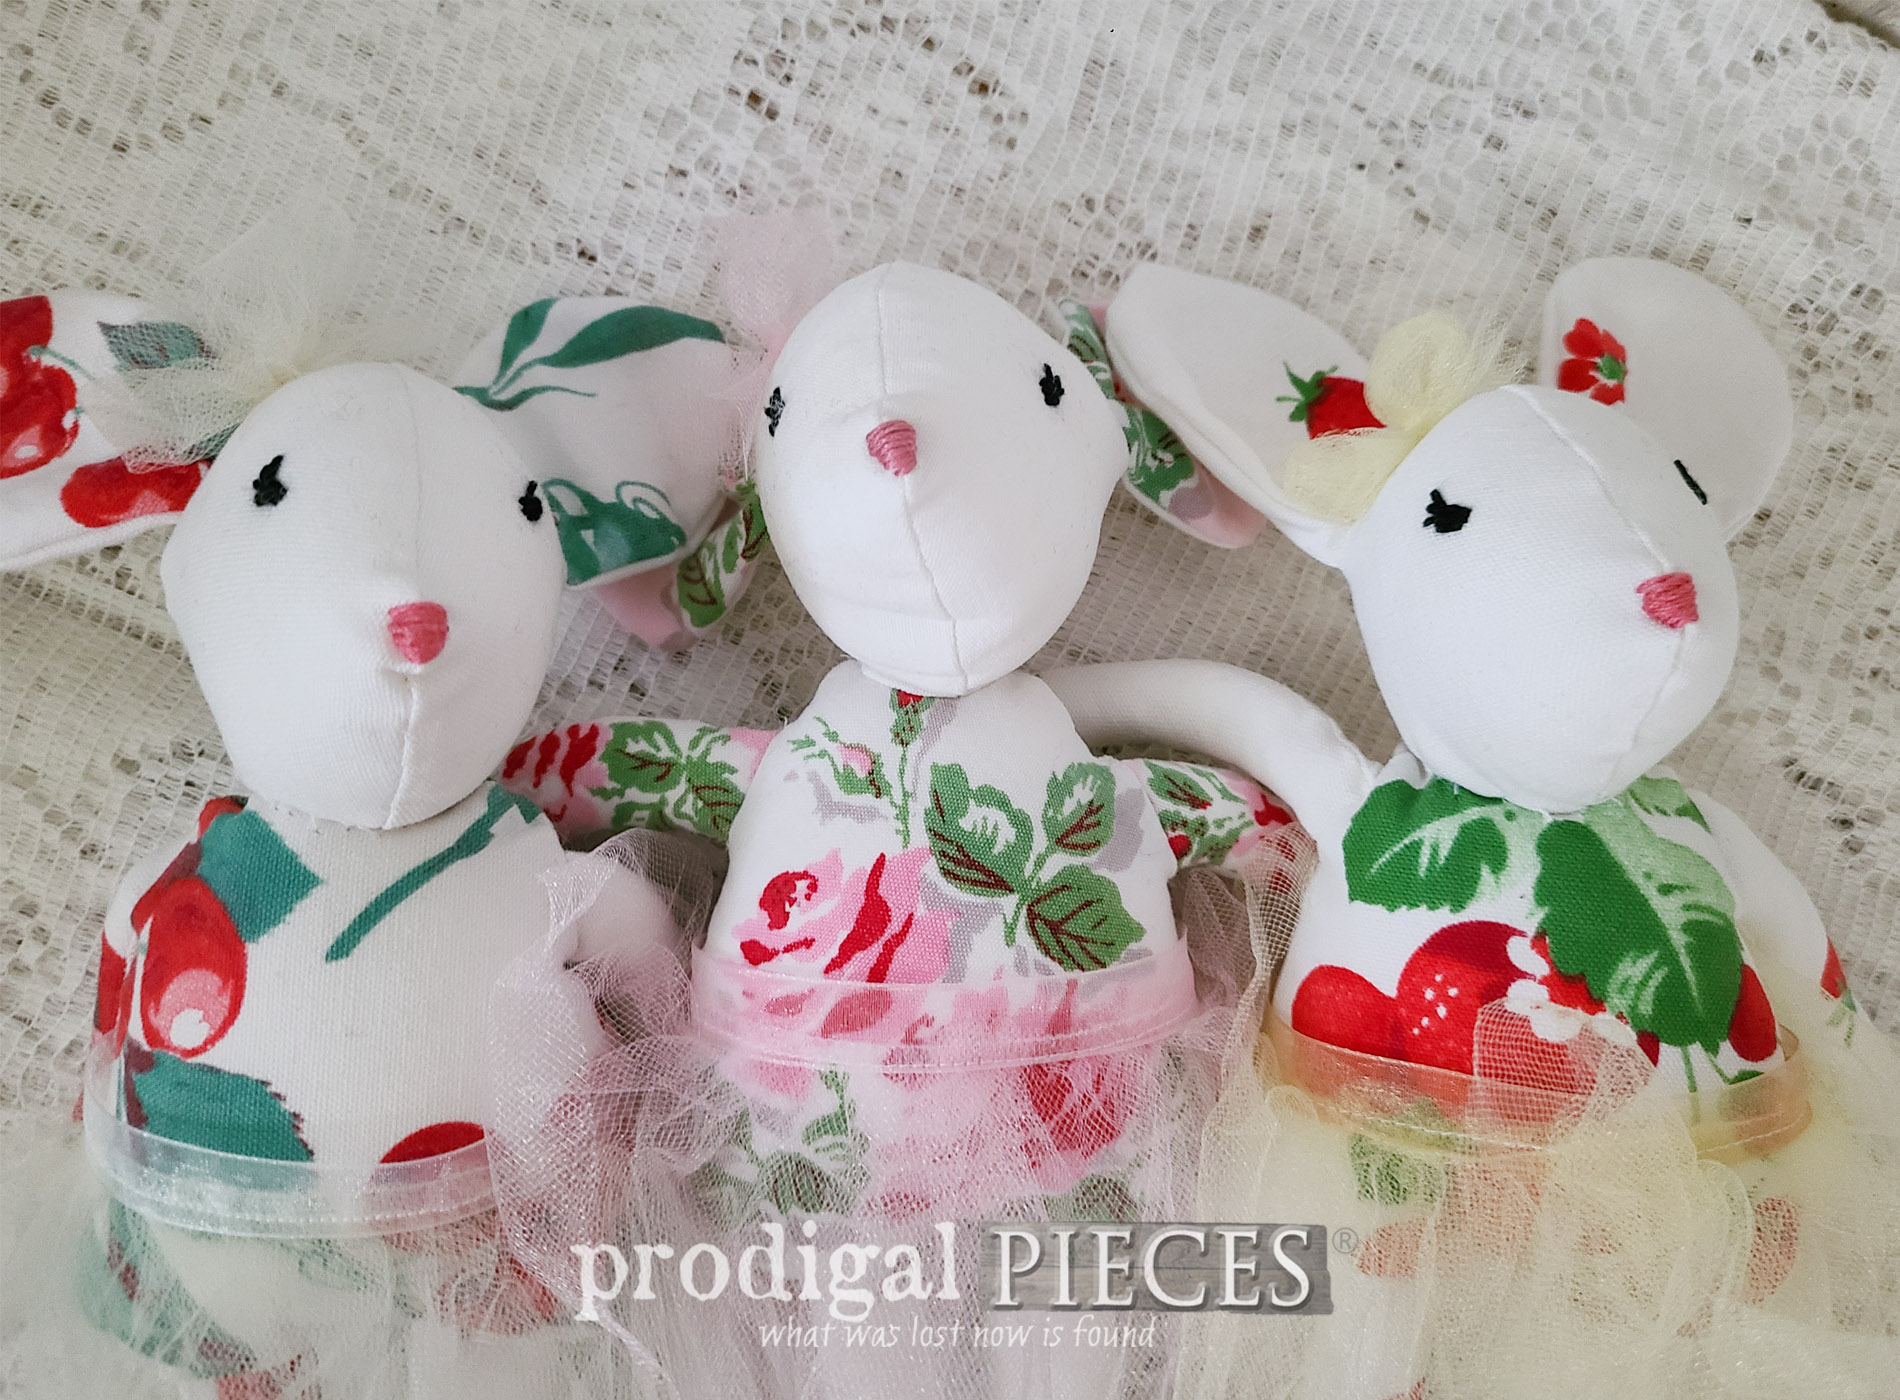 Featured Vintage Tablecloth Ballerina Dolls Handmade by Larissa of Prodigal Pieces | prodigalpieces.com #prodigalpieces #handmade #doll #vintage #giftidea